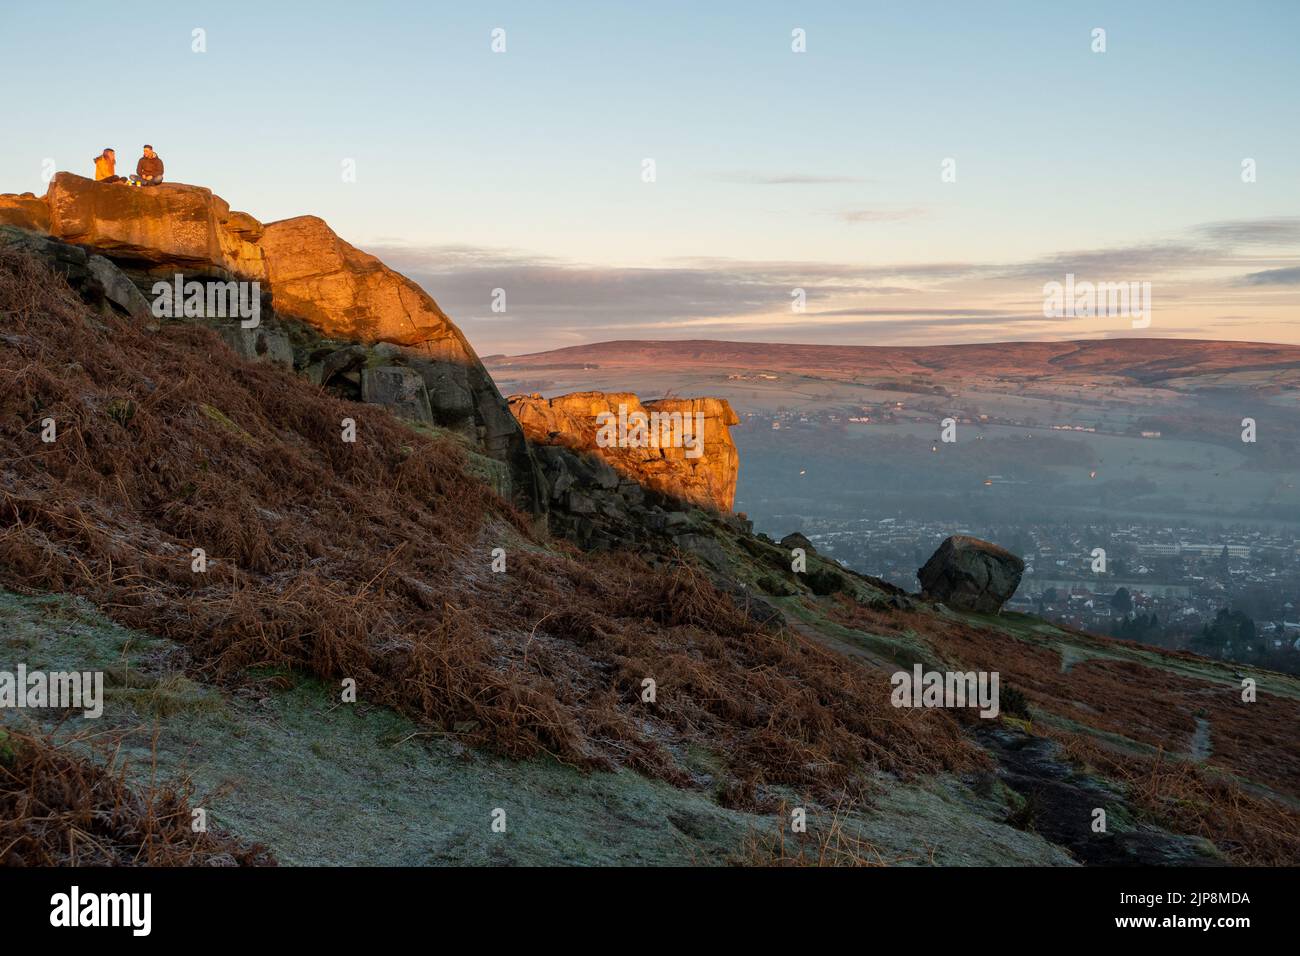 Couple enjoying a hot drink in the sunrise golden hour at the Cow and Calf Rocks, Ilkley Moor, England. Stock Photo